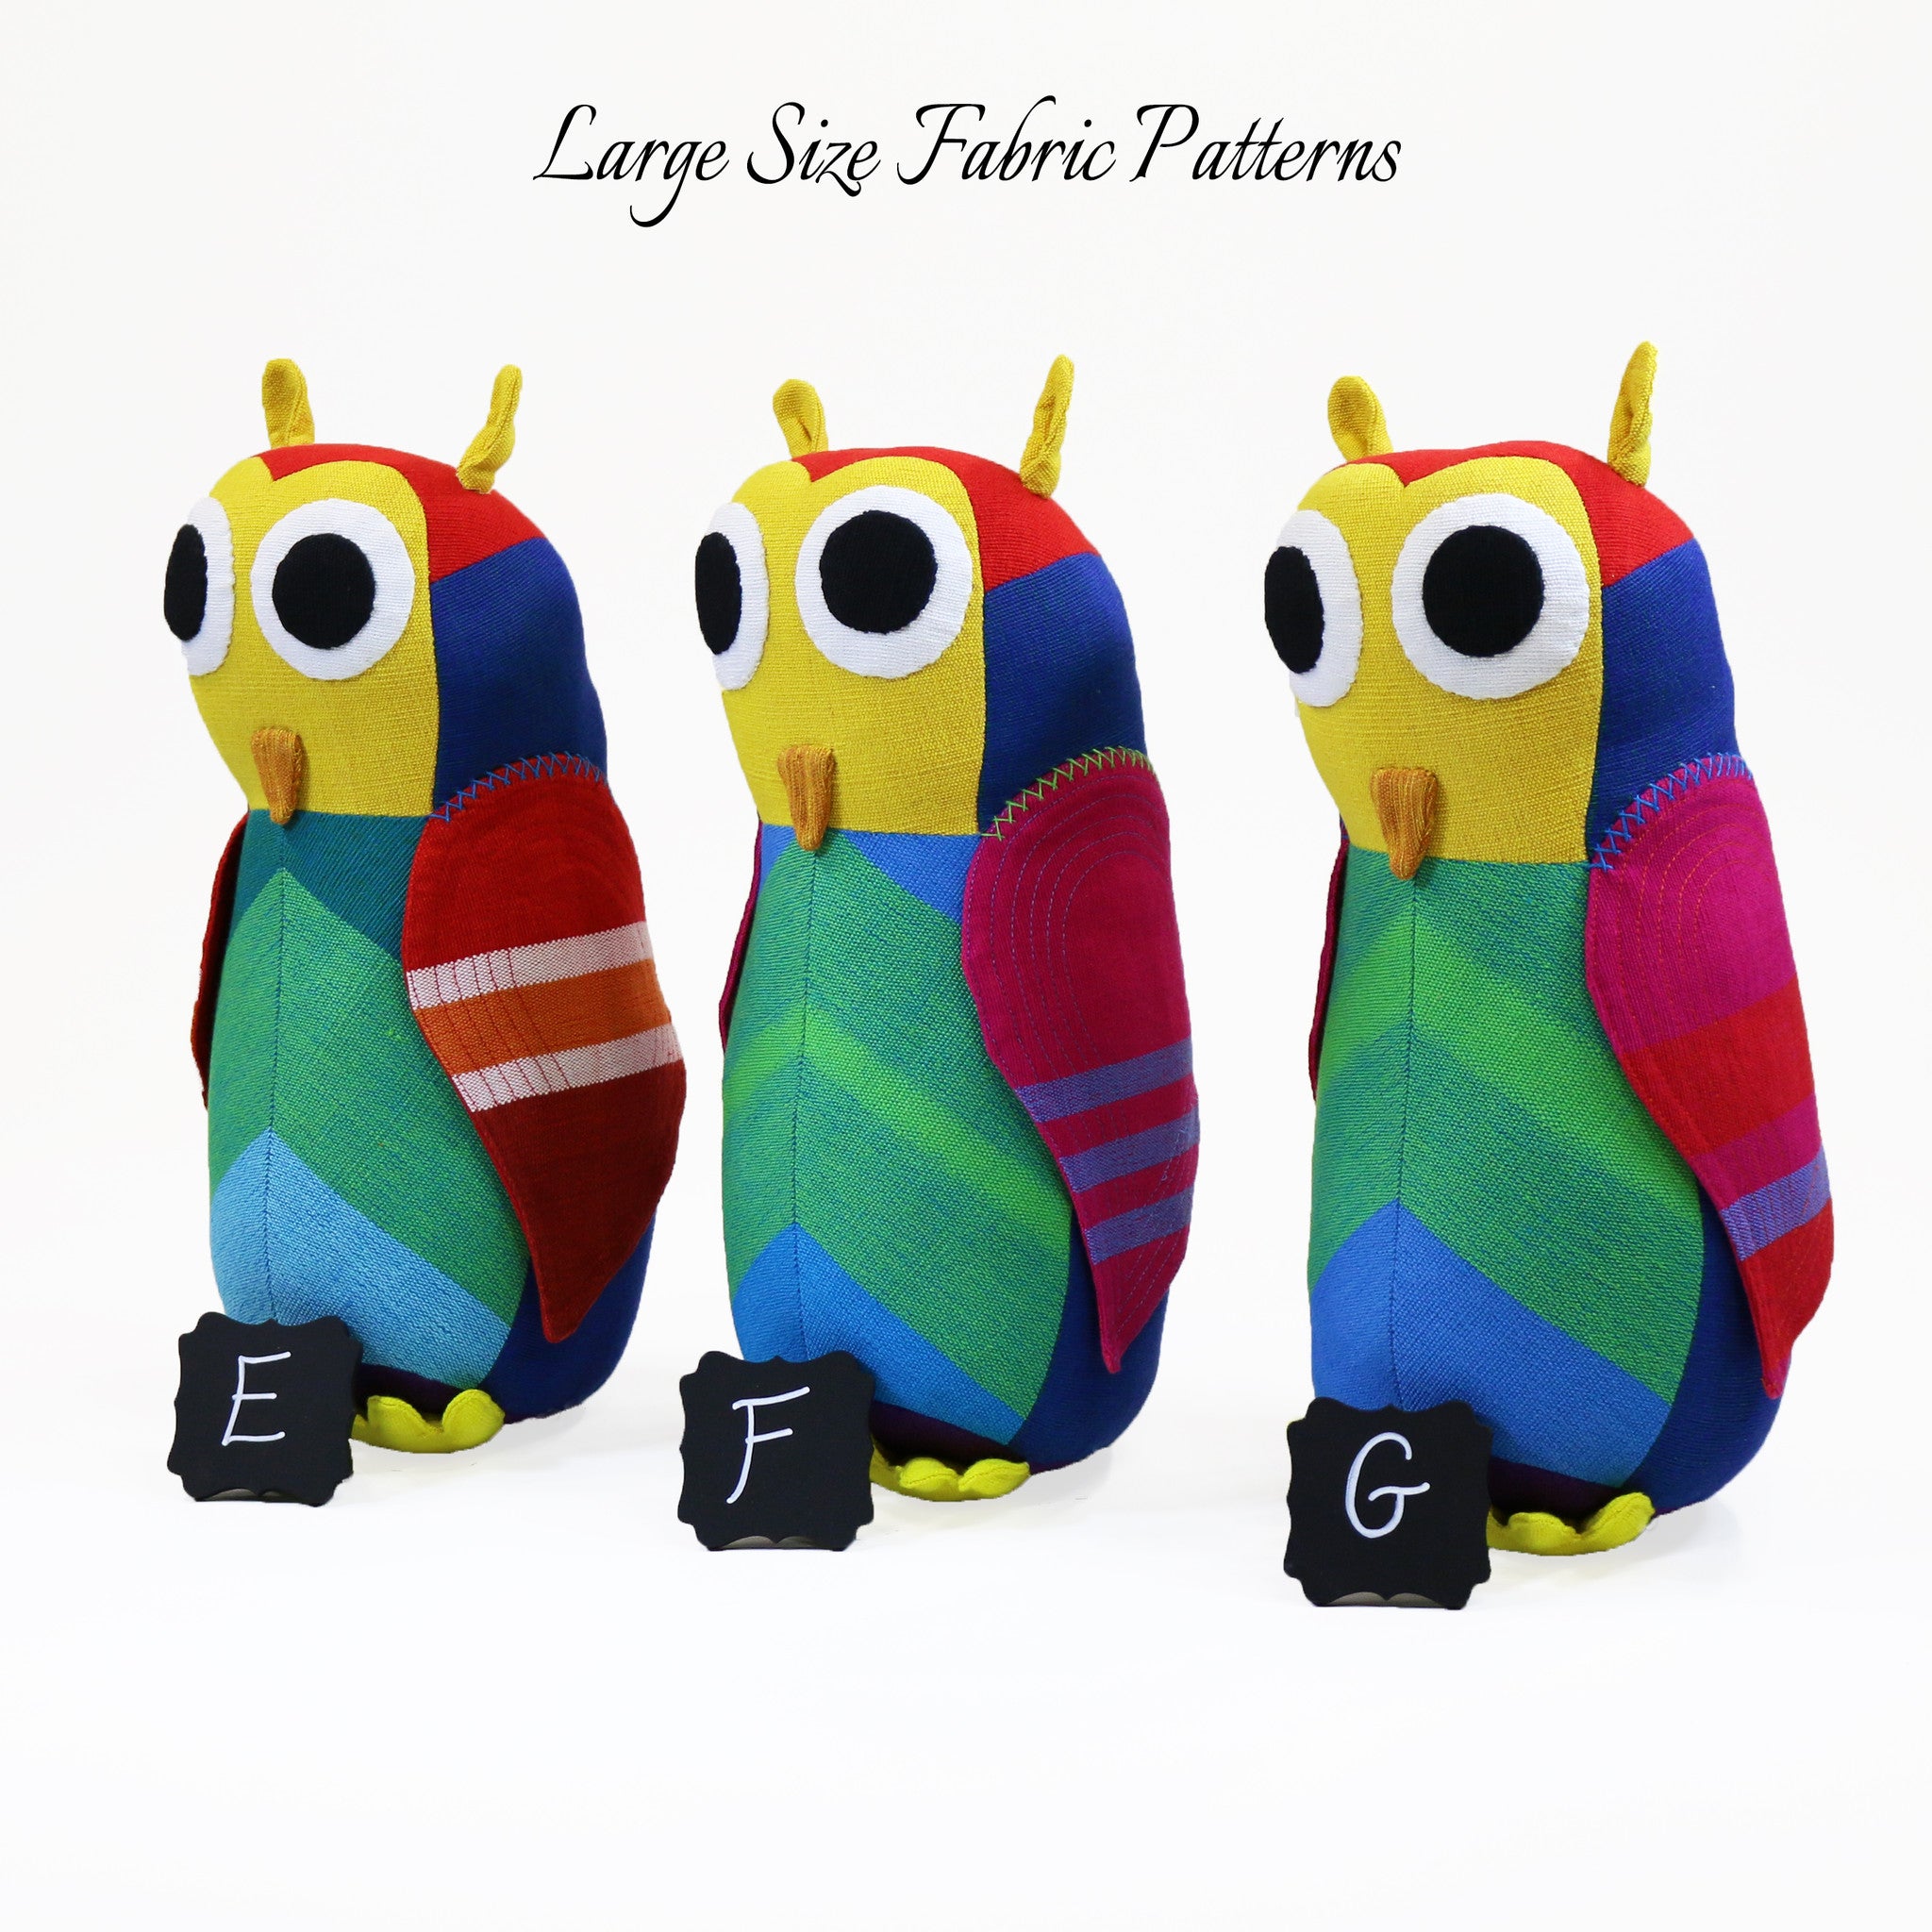 Harvey, the Owl – large size fabric patterns shown